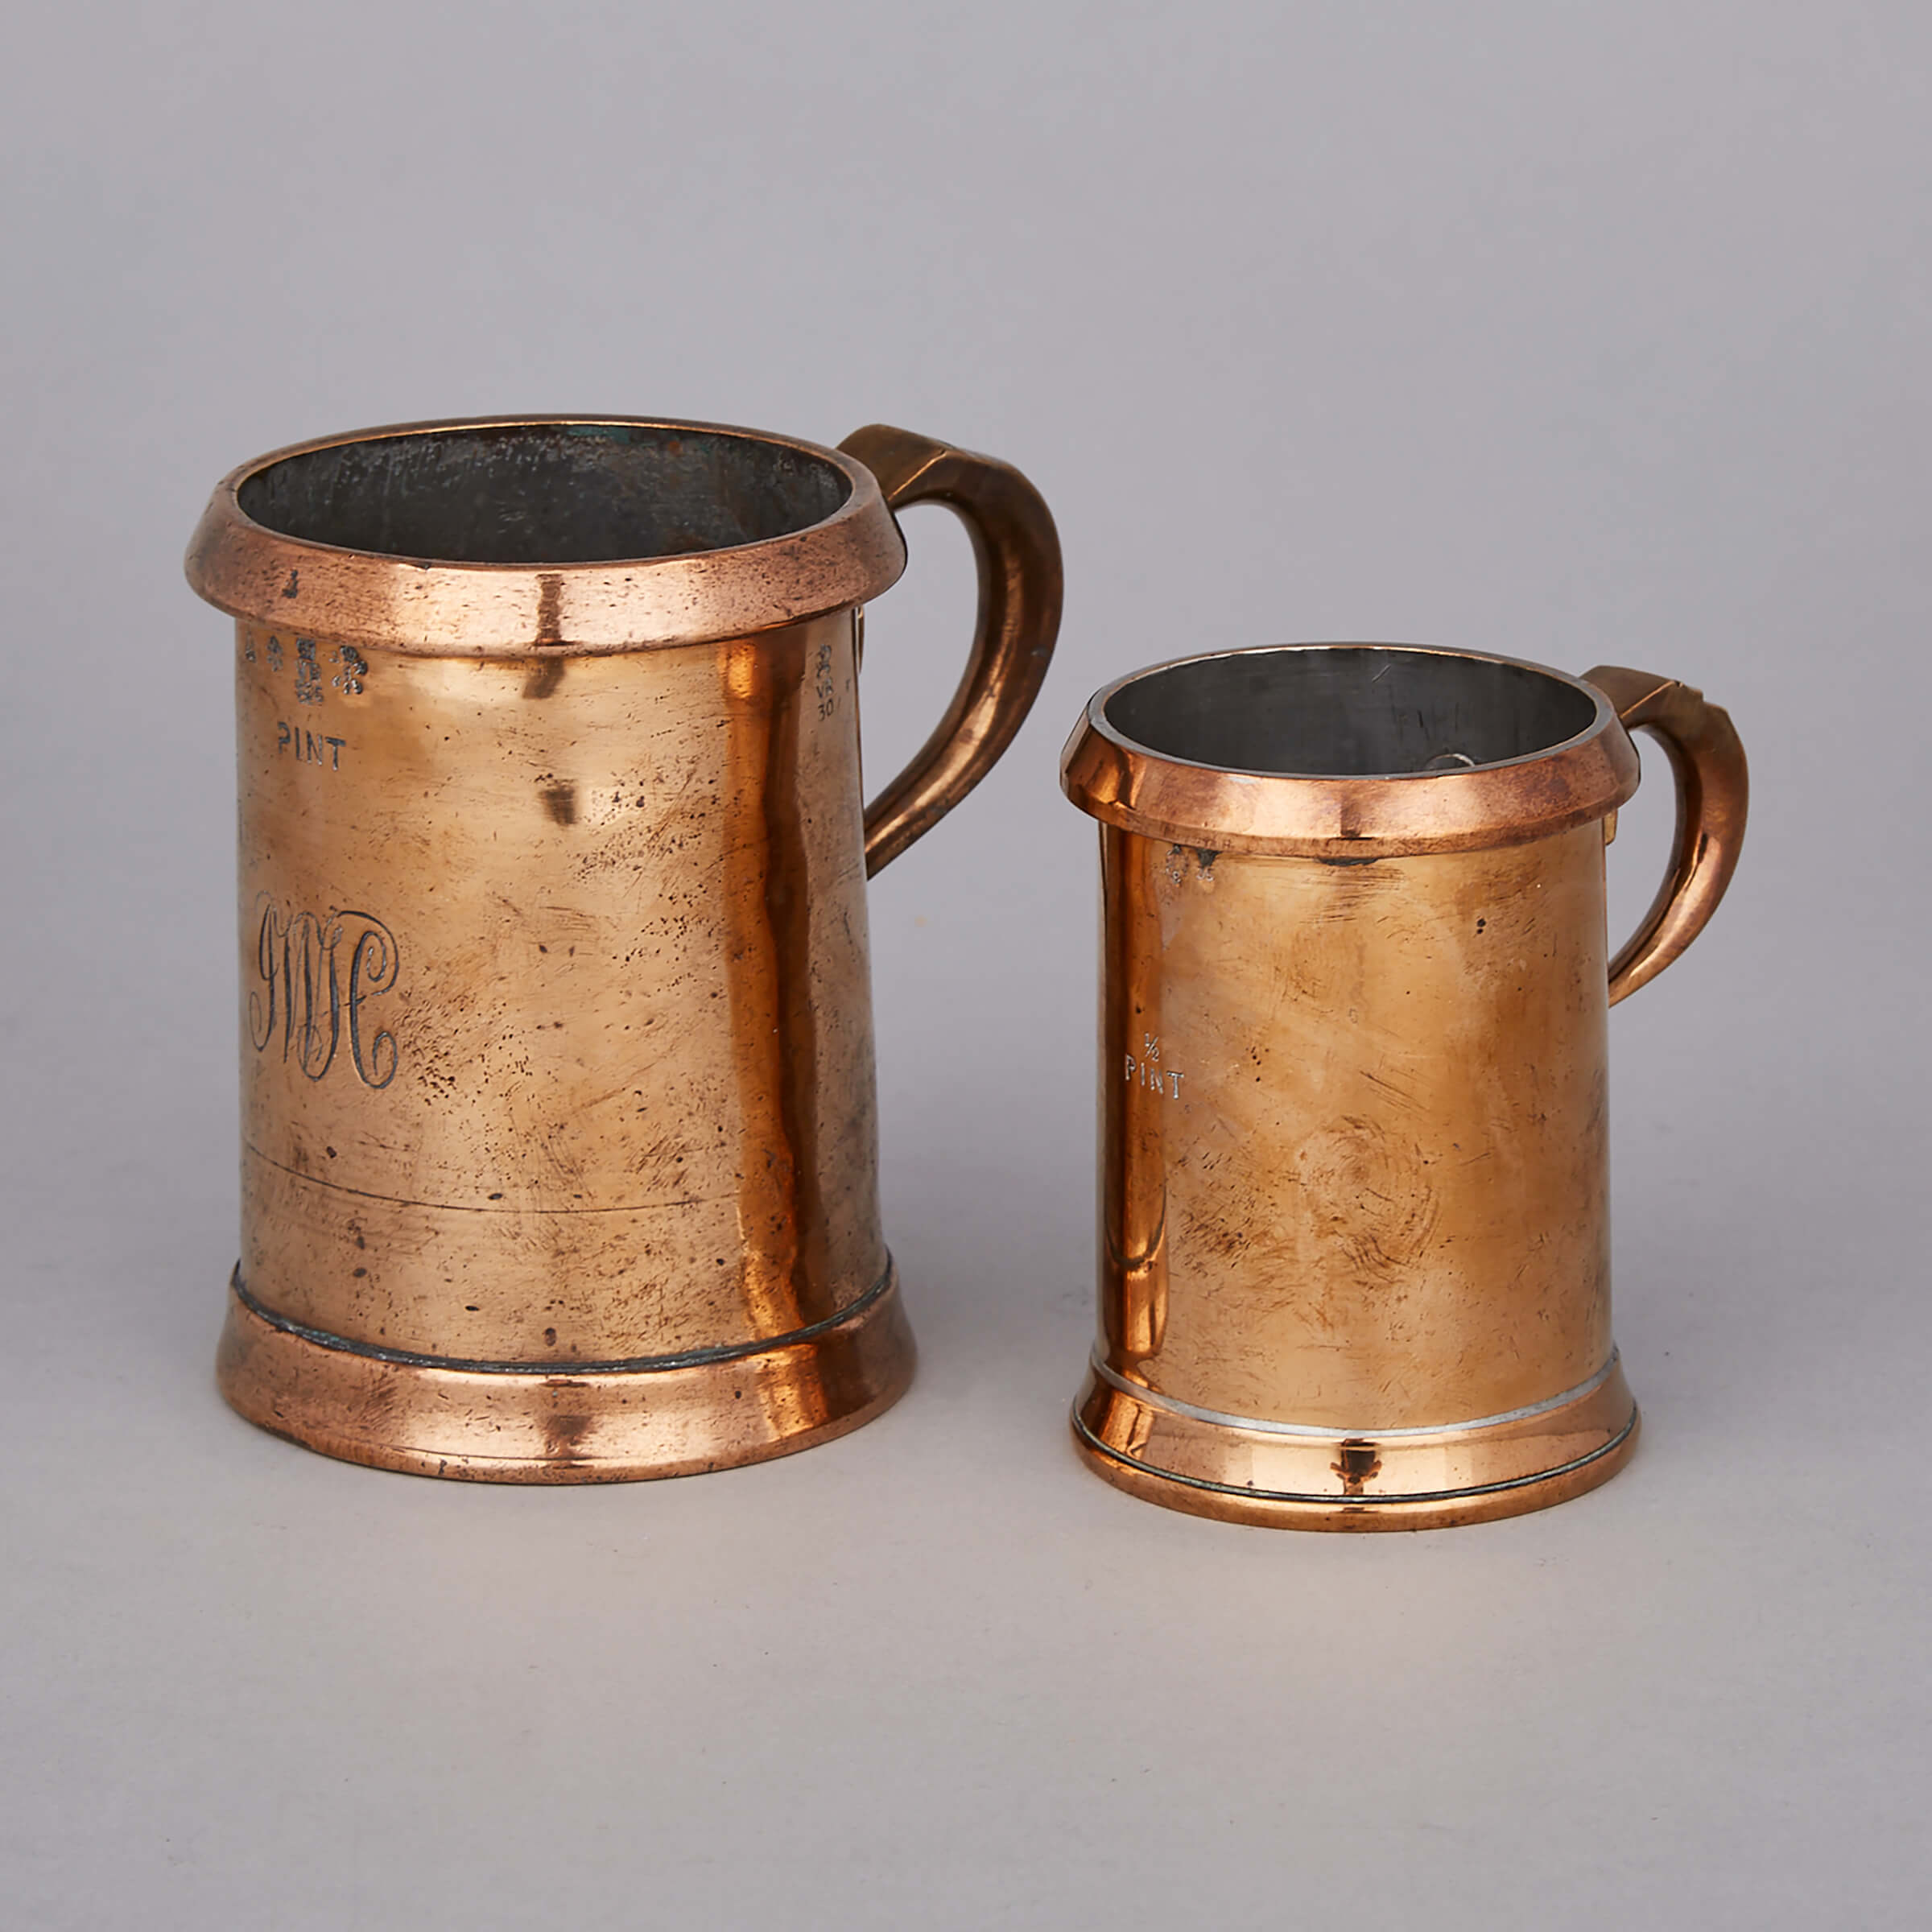 Two English Brass Standard Heavy Rim Measures, 19th/early 20th centuries